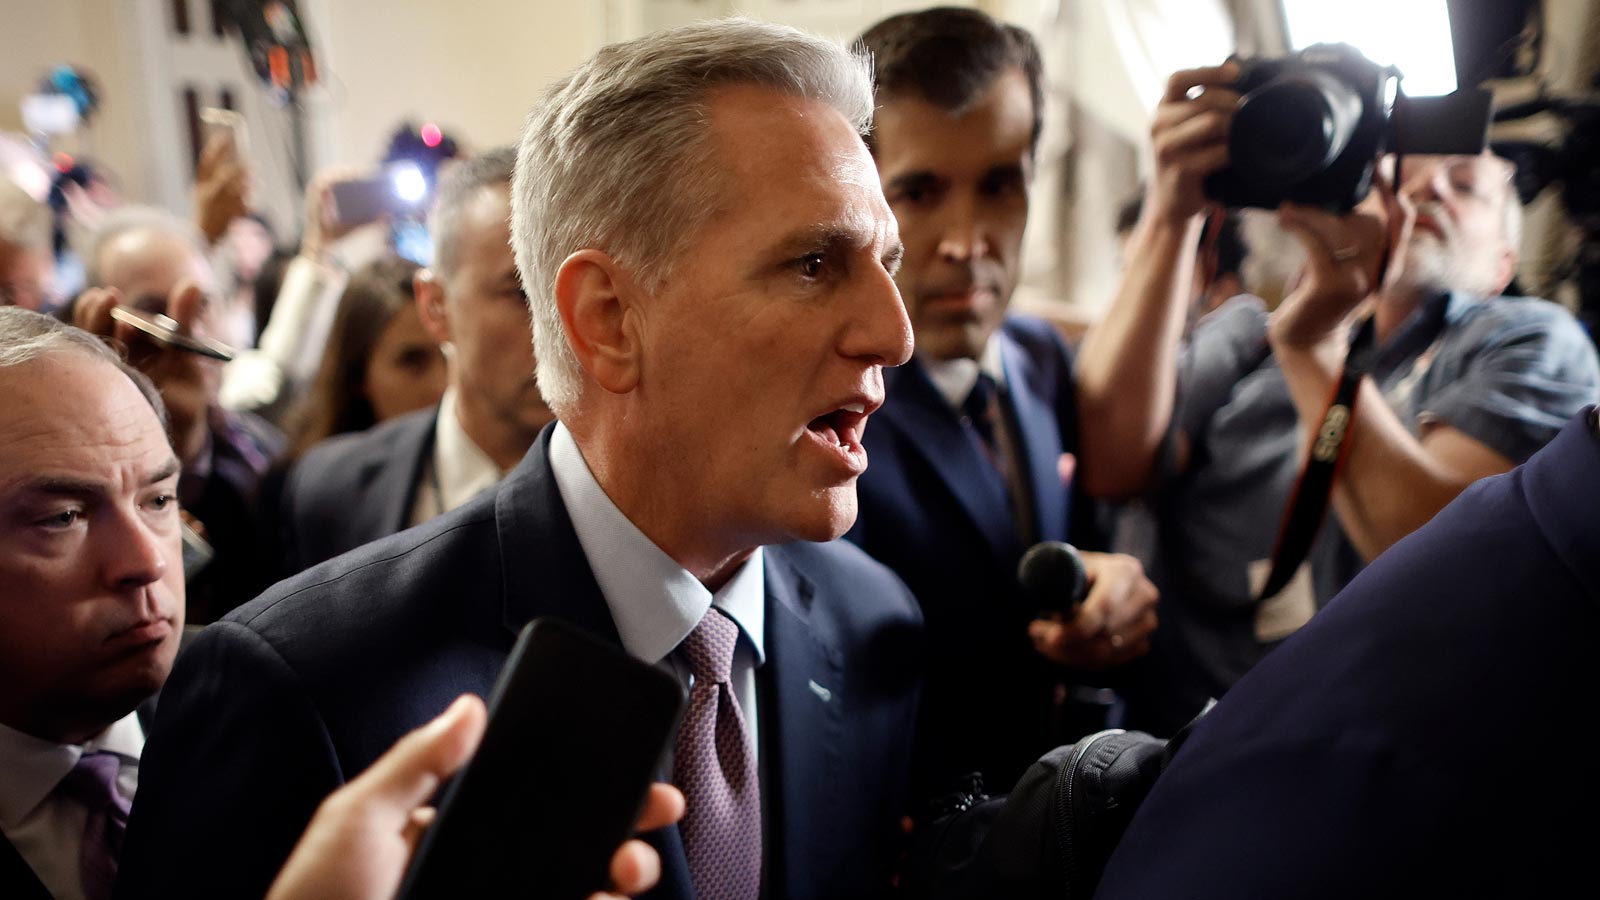 Kevin Mccarthy Ousted As Speaker Of The House Following Vote